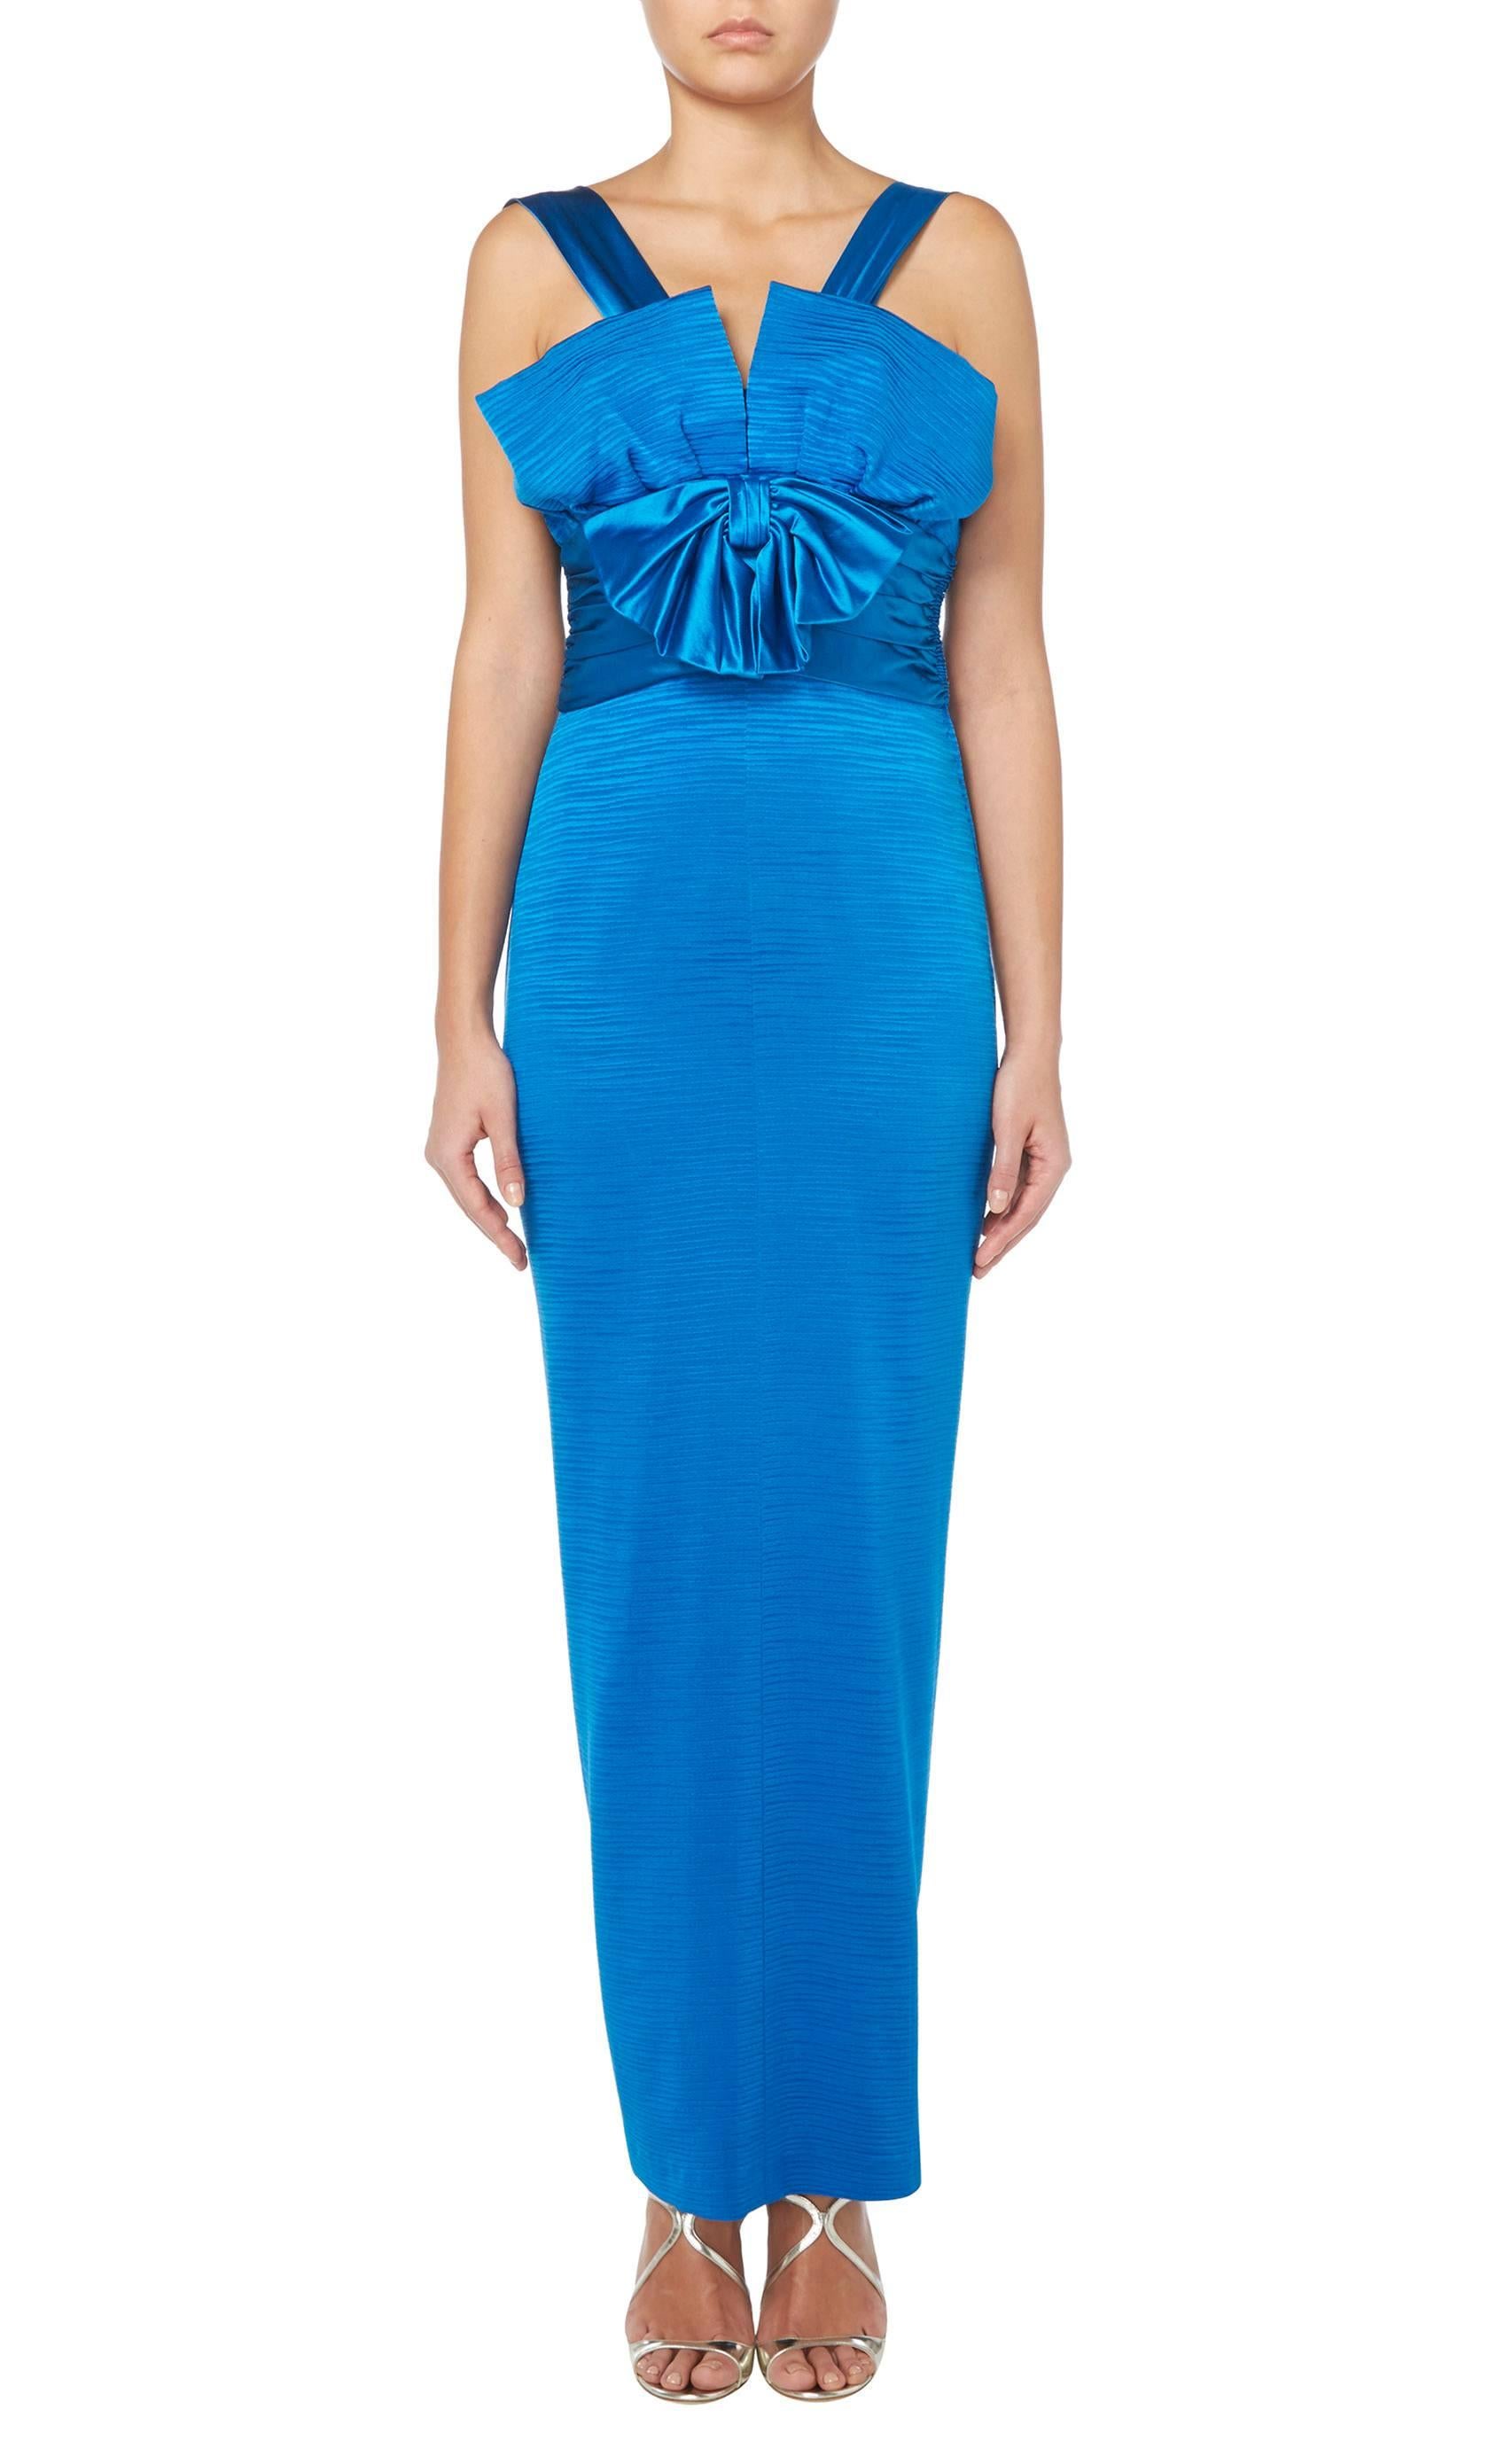 The epitome of Hollywood glamour, this gown is simply perfect for red carpet or black tie events. Constructed in a stunning shade of blue ribbed silk, the gown creates a flattering hourglass silhouette, skimming the body seductively and falling into